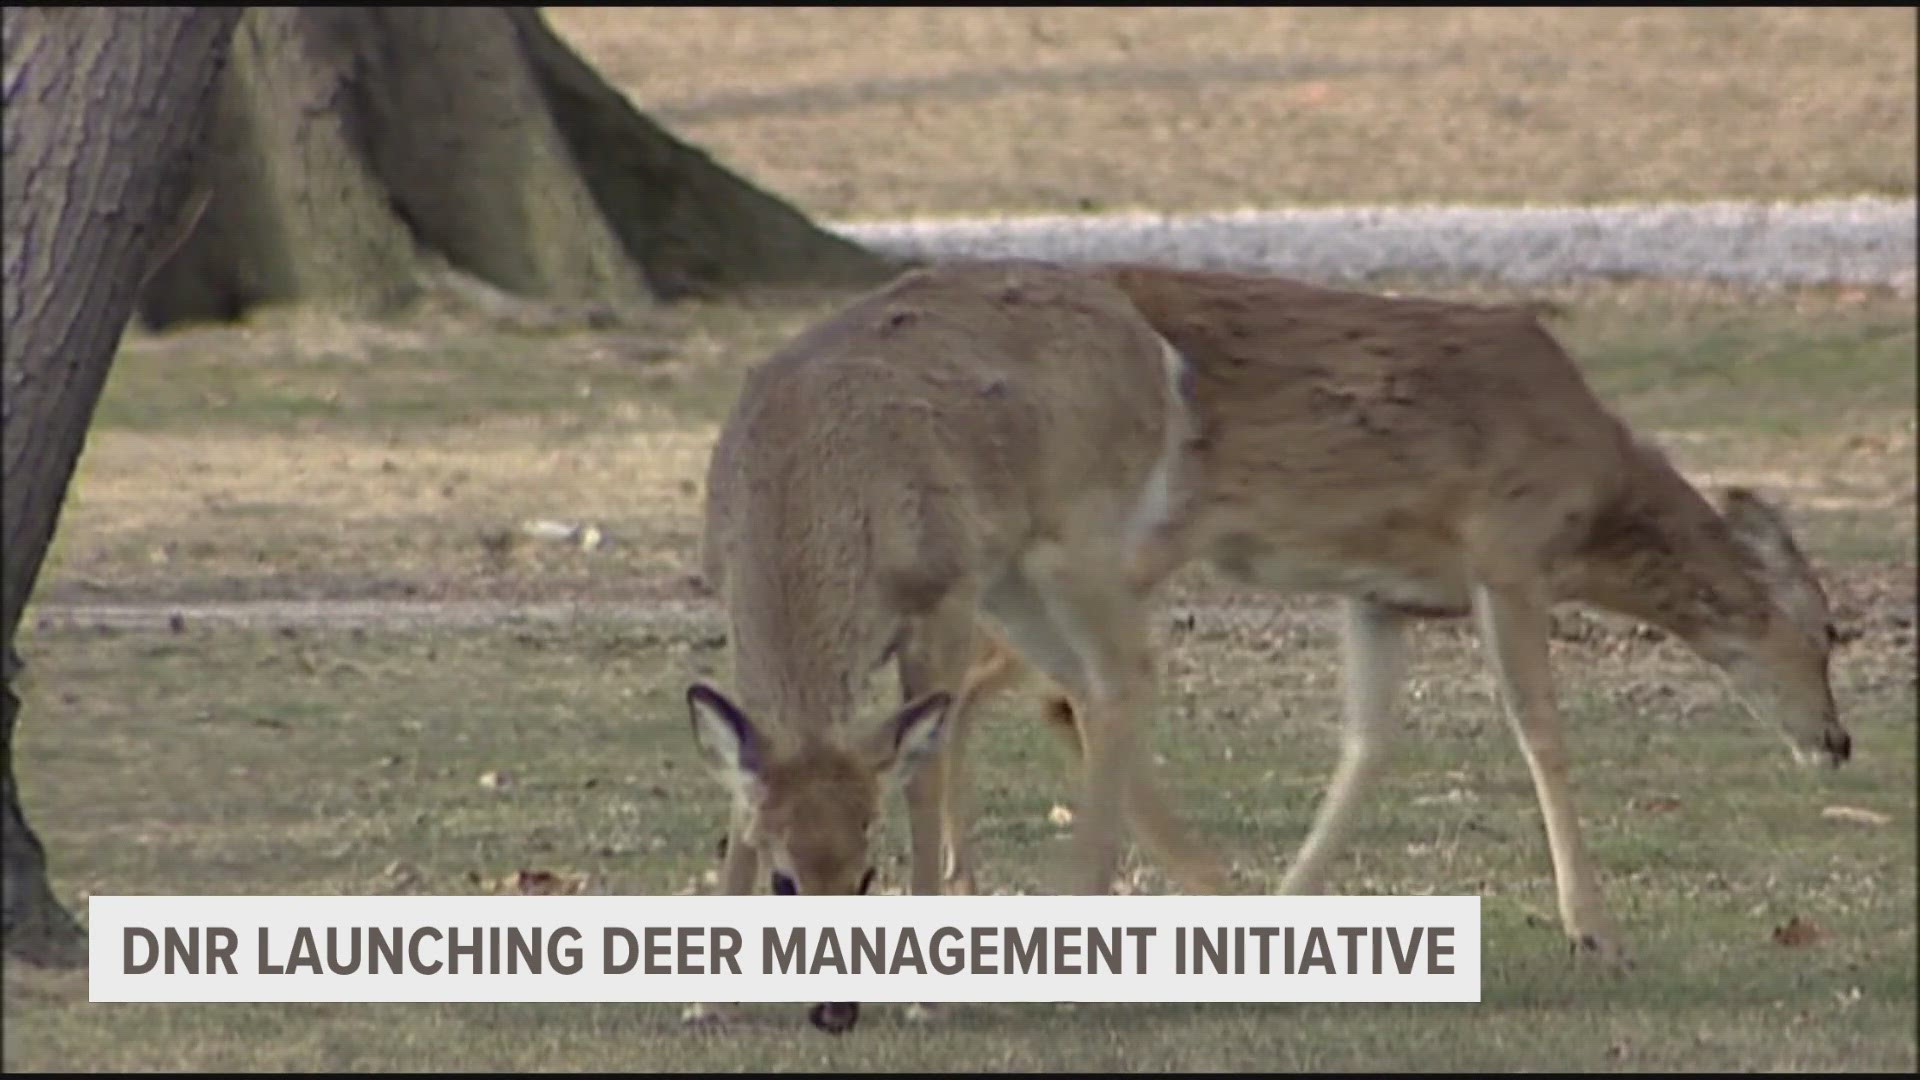 As deer populations continue to rise the DNR is looking to solve the problem.